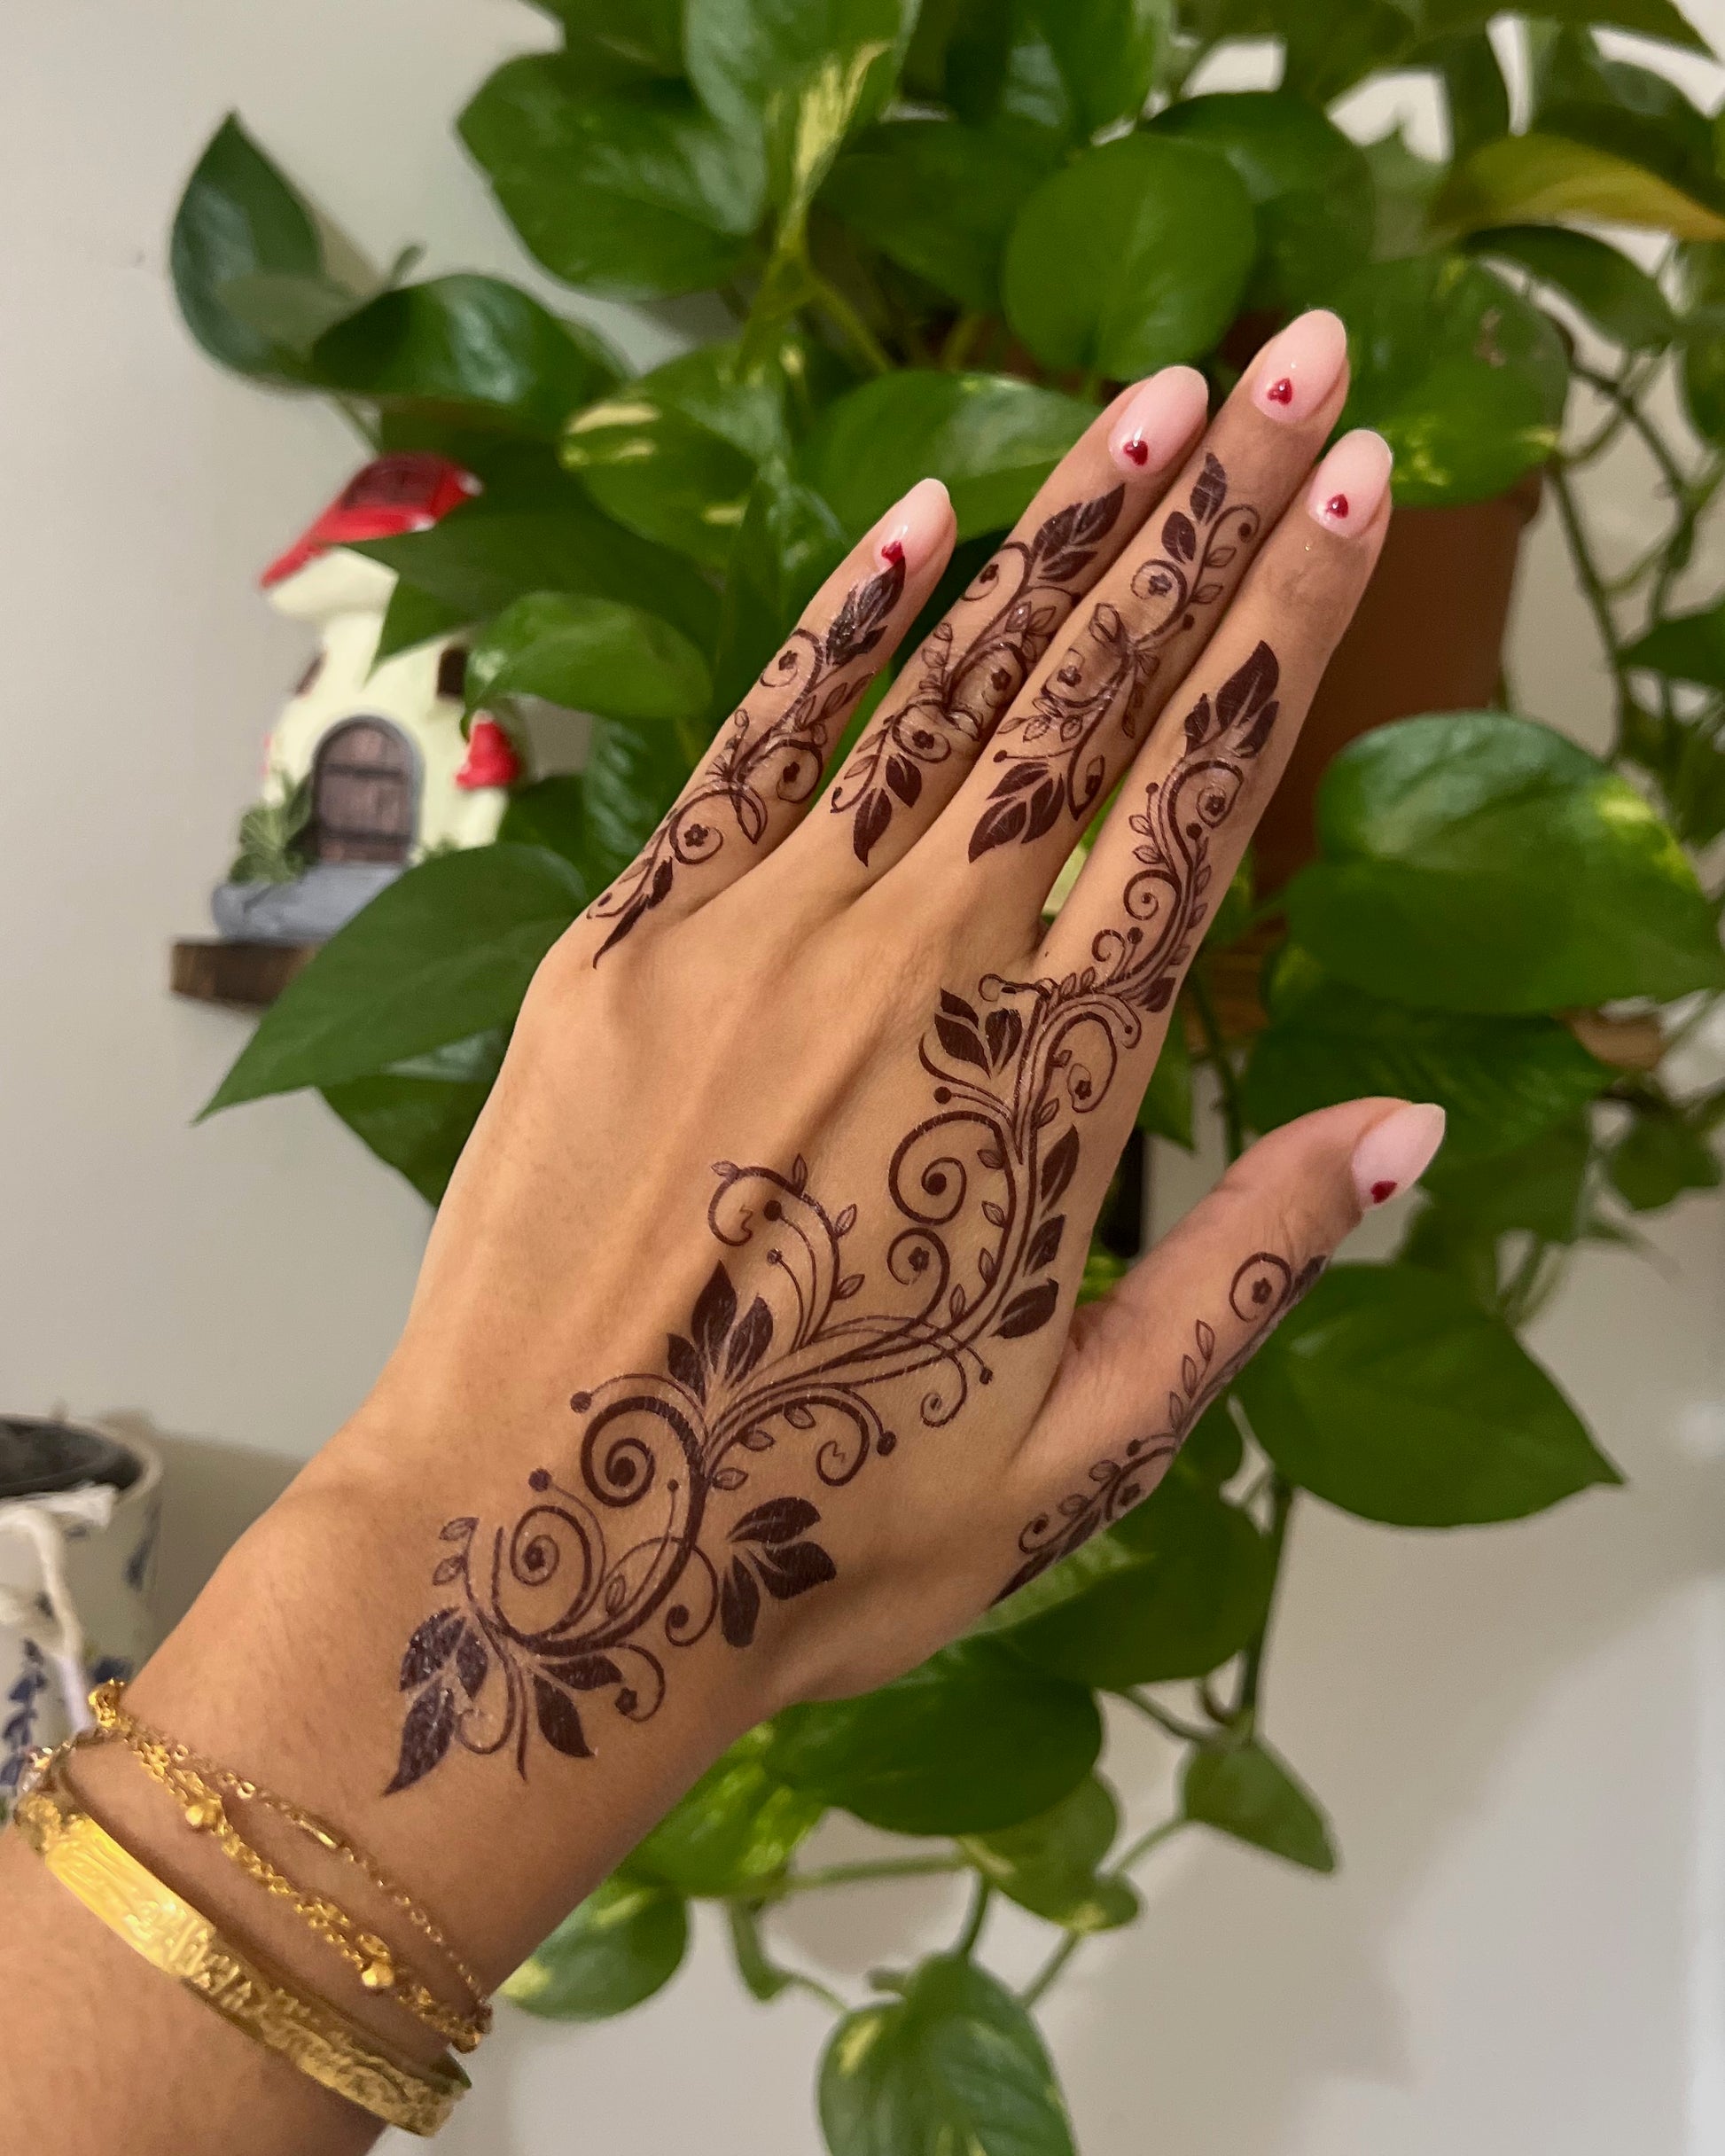 Henna Tattoo on Bride`s Hand.Moroccan Wedding Preparation Henna Party.  Temperate White Mehndi Stock Image - Image of ceremony, hands: 248390317